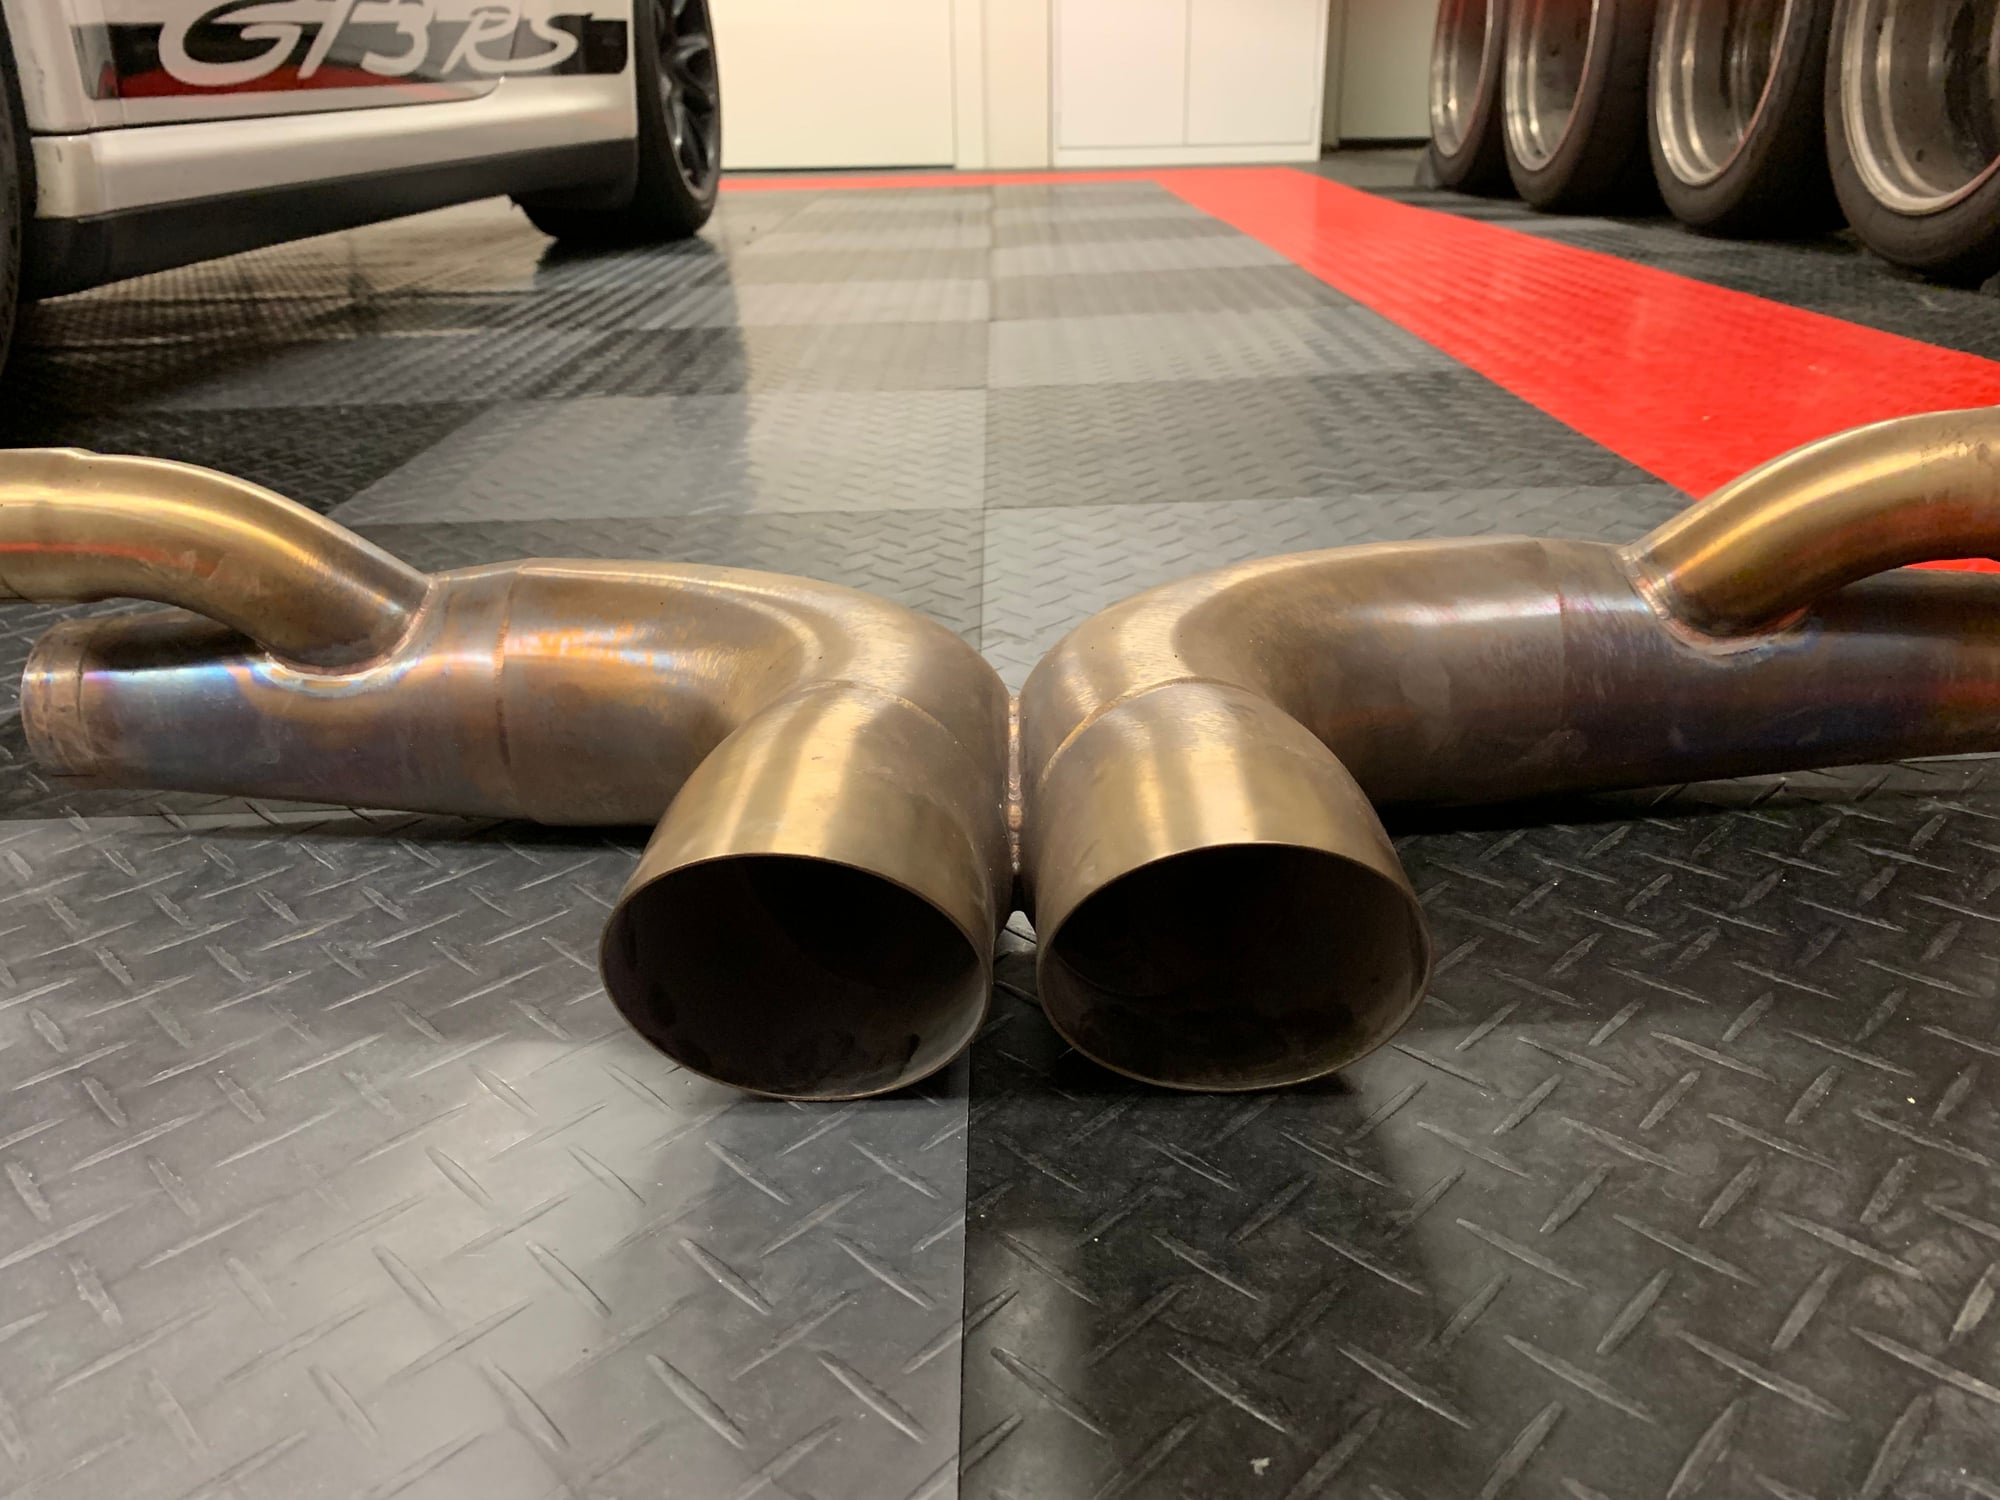 Engine - Exhaust - GT3 BBI center exhaust (NorCal) - Used - 2007 to 2017 Porsche GT3 - San Francisco, CA 94109, United States